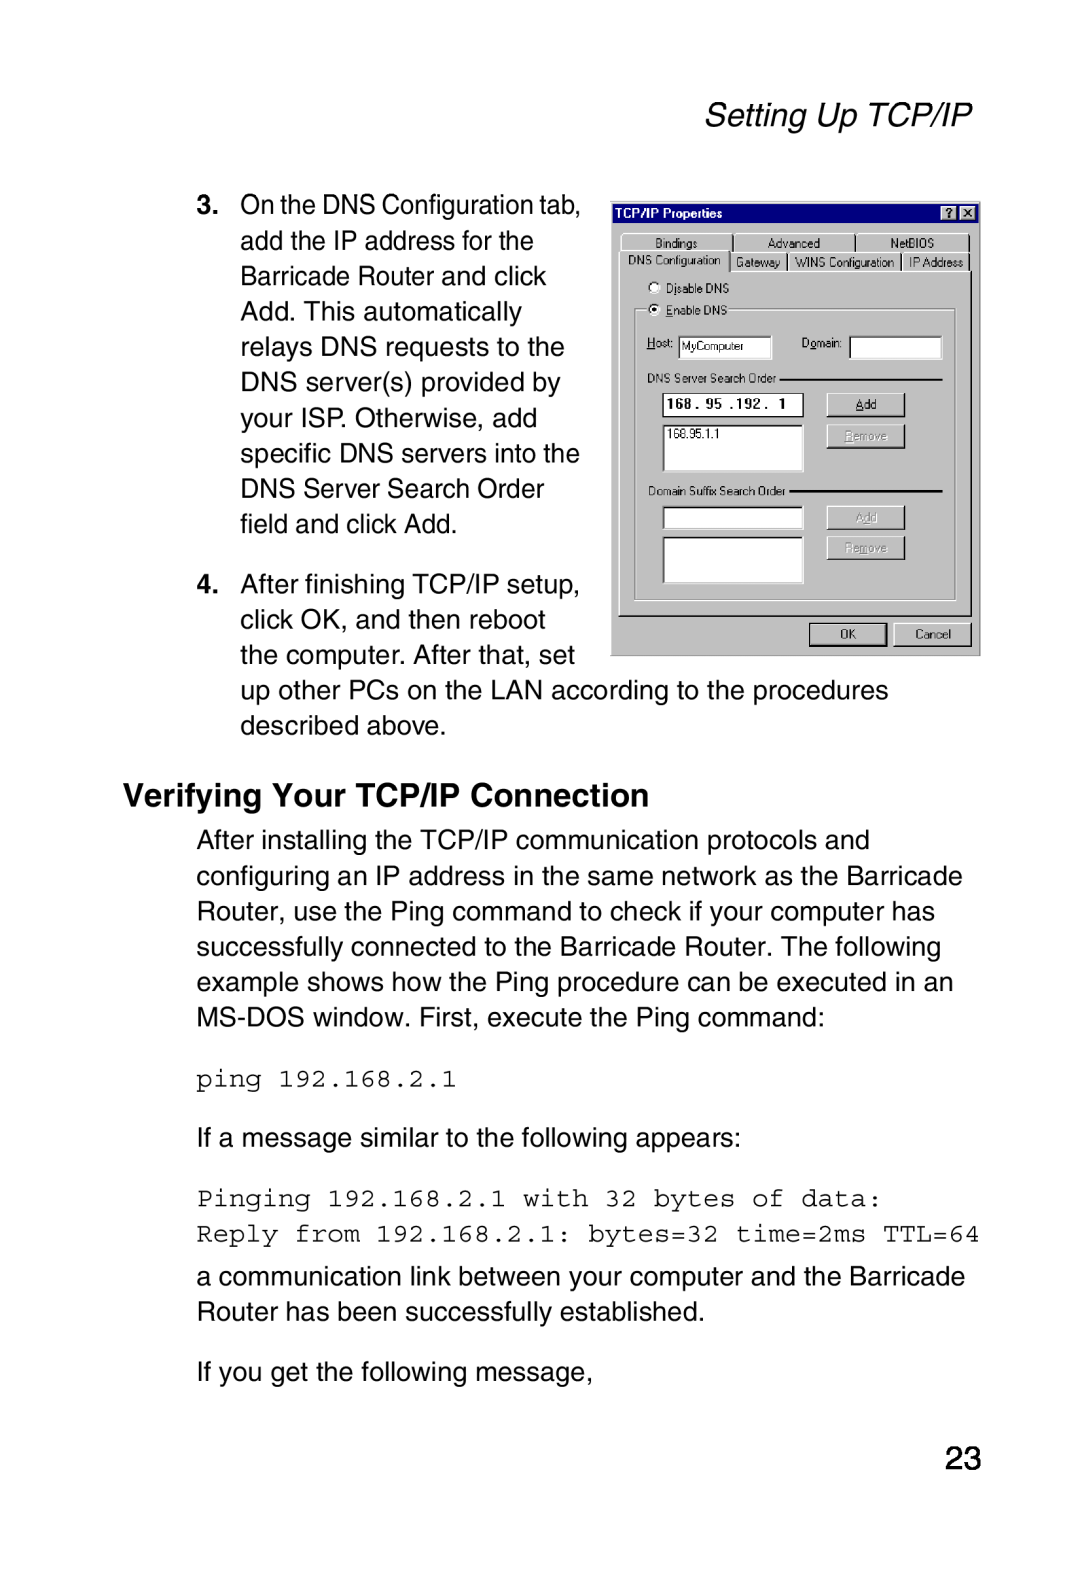 Sharp S M C 7 0 0 4 A B R, SMC7004ABR manual Verifying Your TCP/IP Connection, Setting Up TCP/IP 